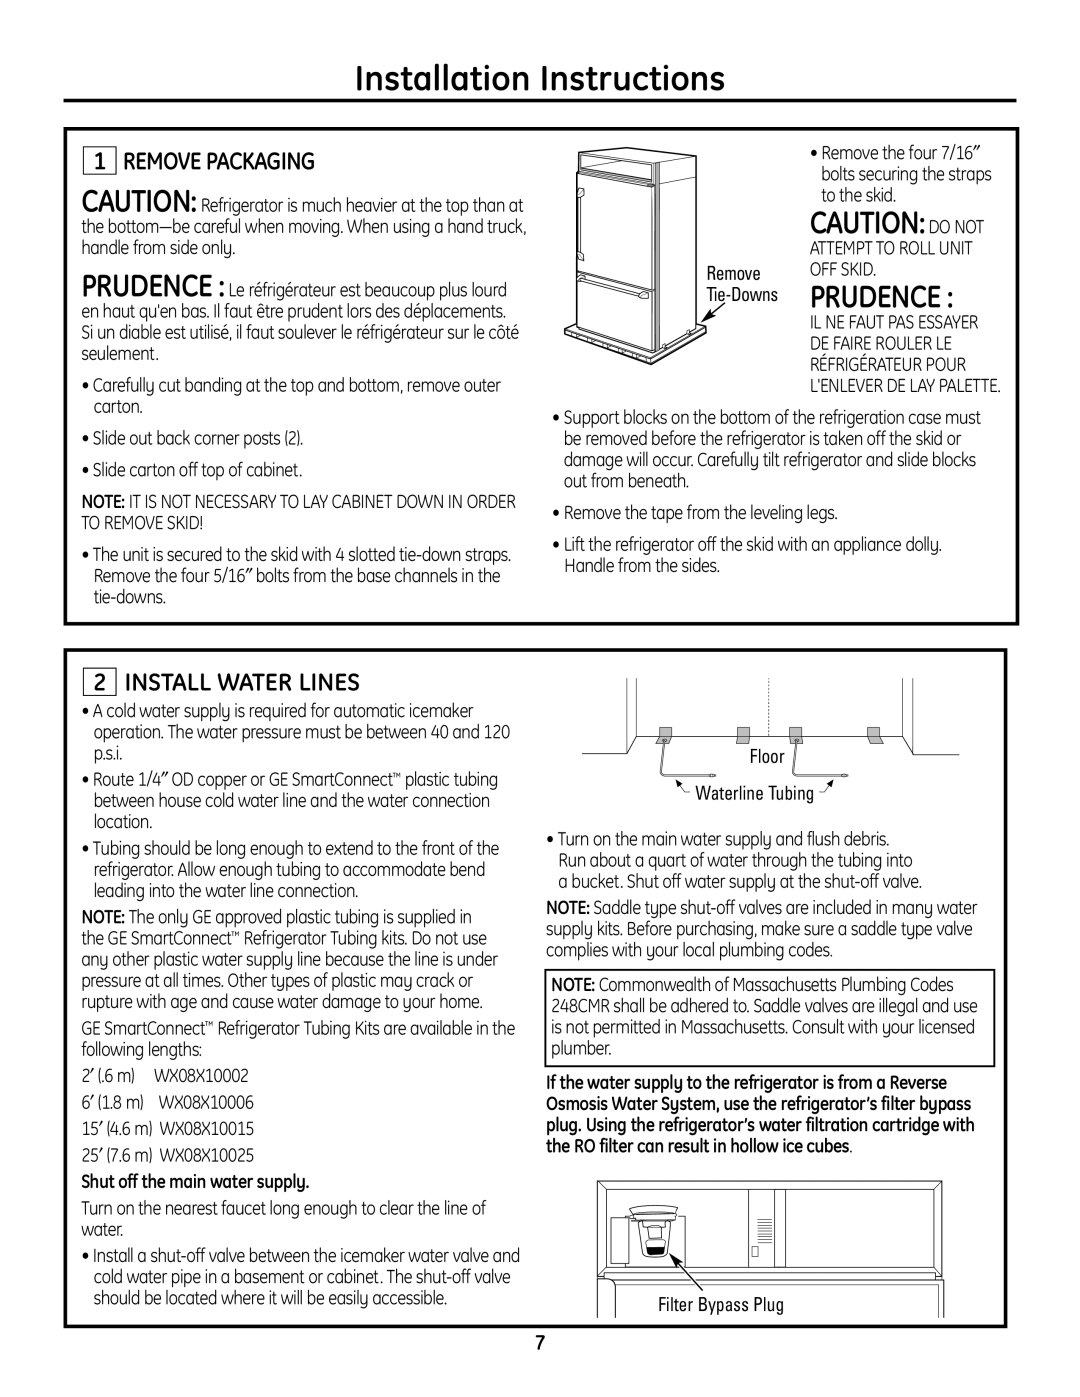 GE ZICP720 Remove Packaging, Install Water Lines, Shut off the main water supply, Installation Instructions, Cautiondo Not 